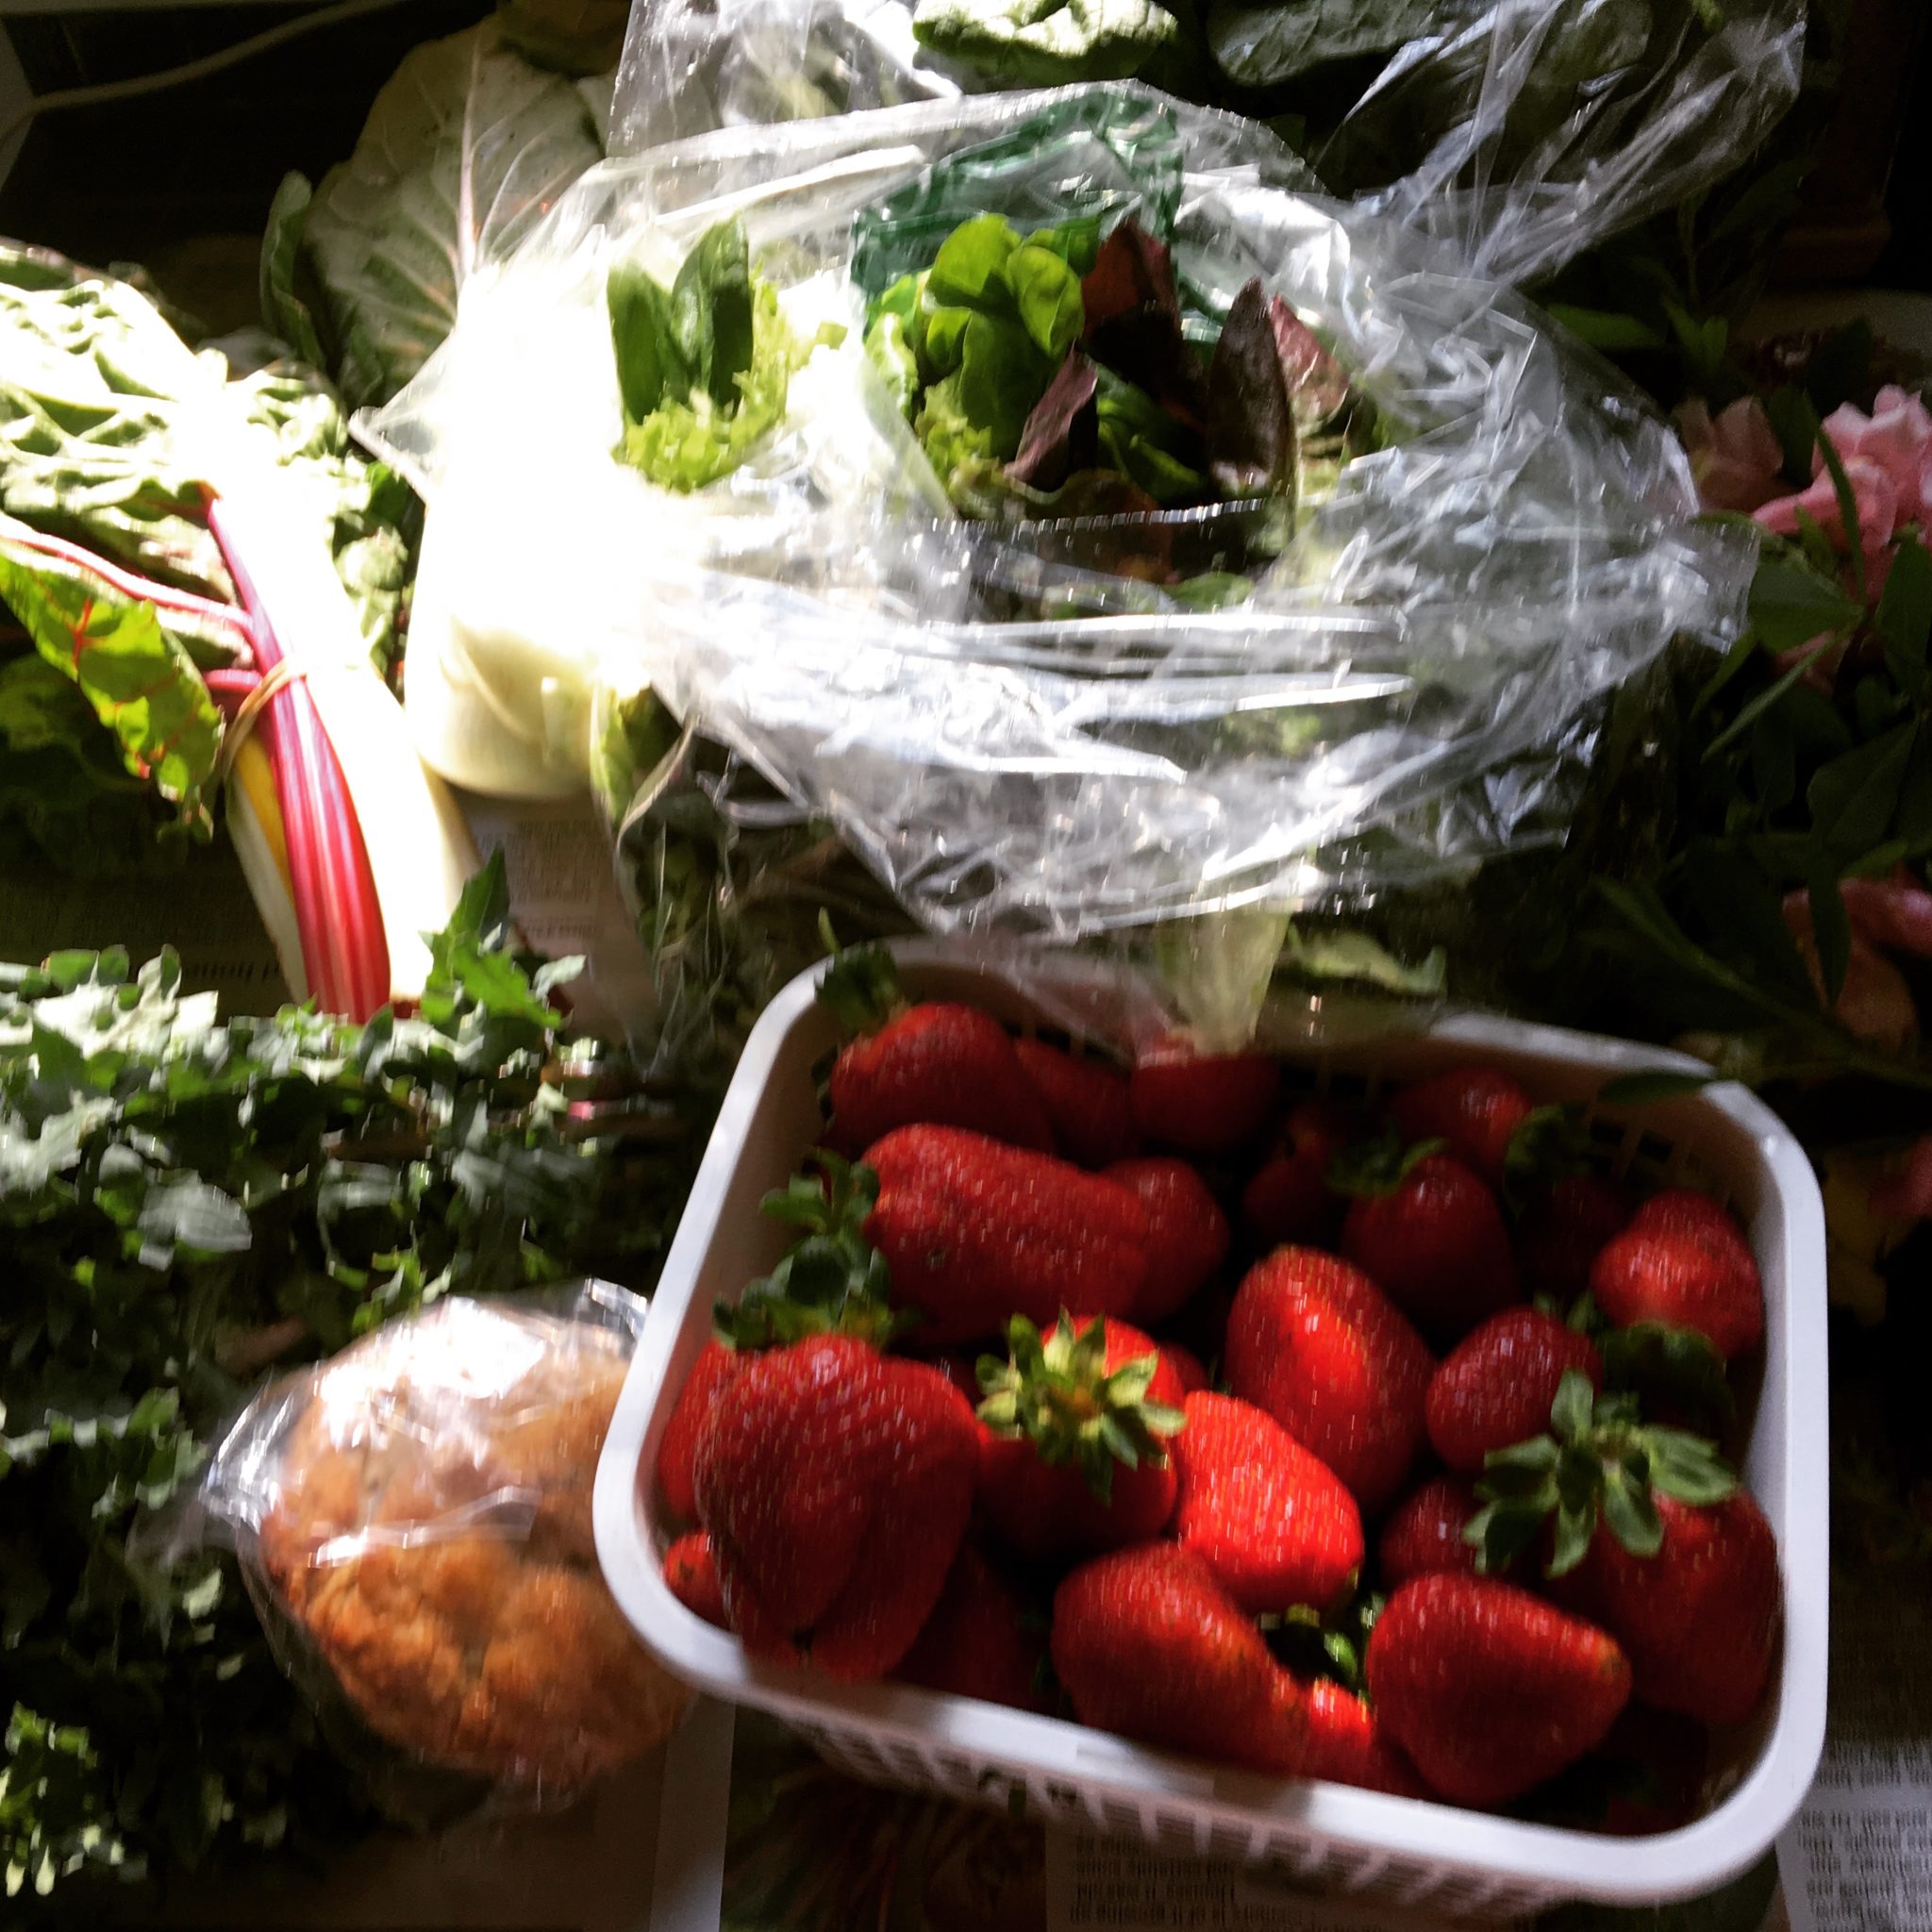 Greens and Strawberries from a Farmer's Market